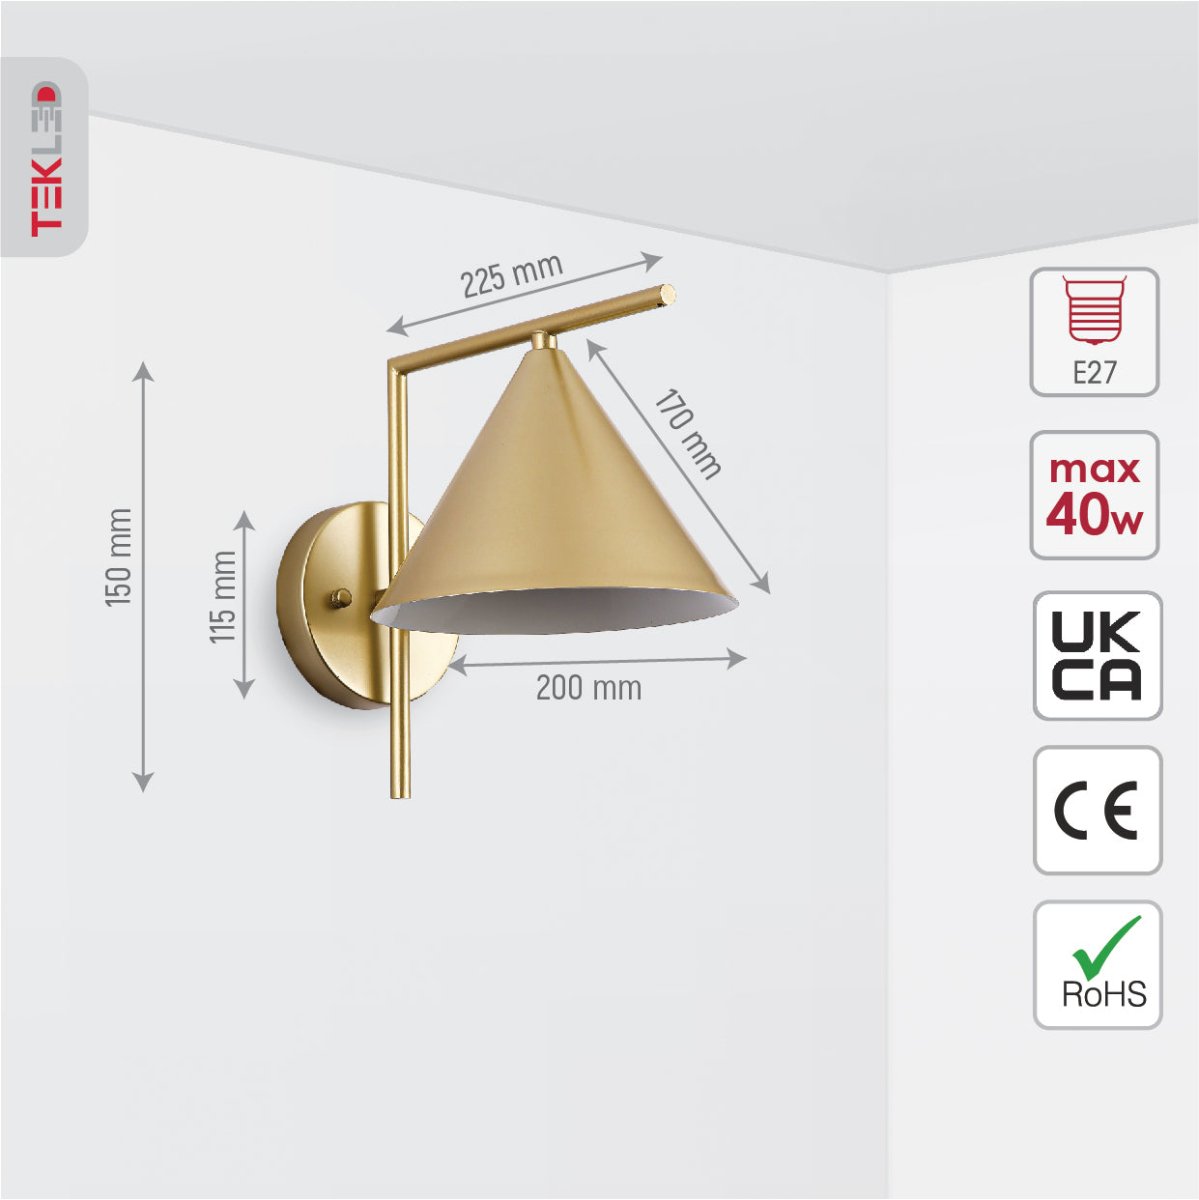 Size and specs of Gold Metal Funnel Wall Light with E27 Fitting | TEKLED 151-19658